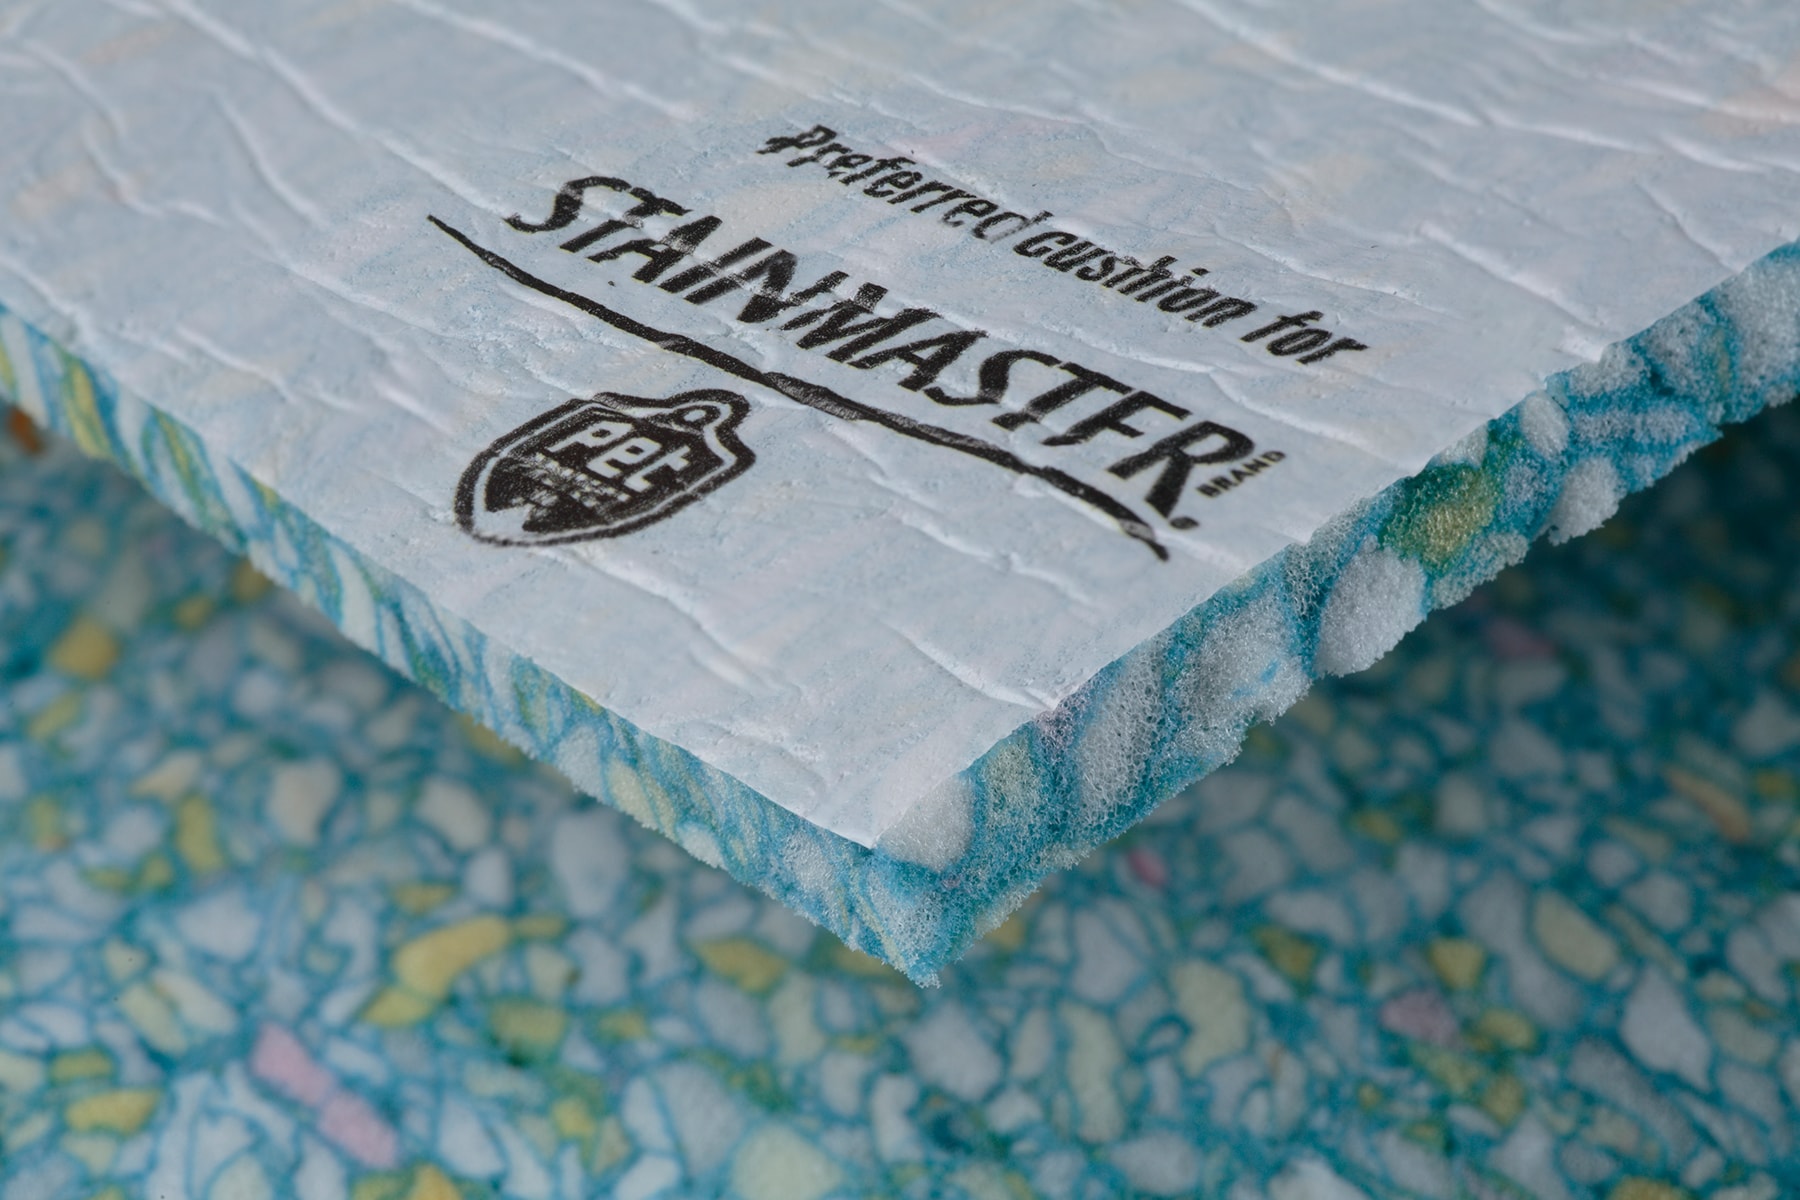 STAINMASTER 13-mm Foam Carpet Padding with Moisture Barrier in the